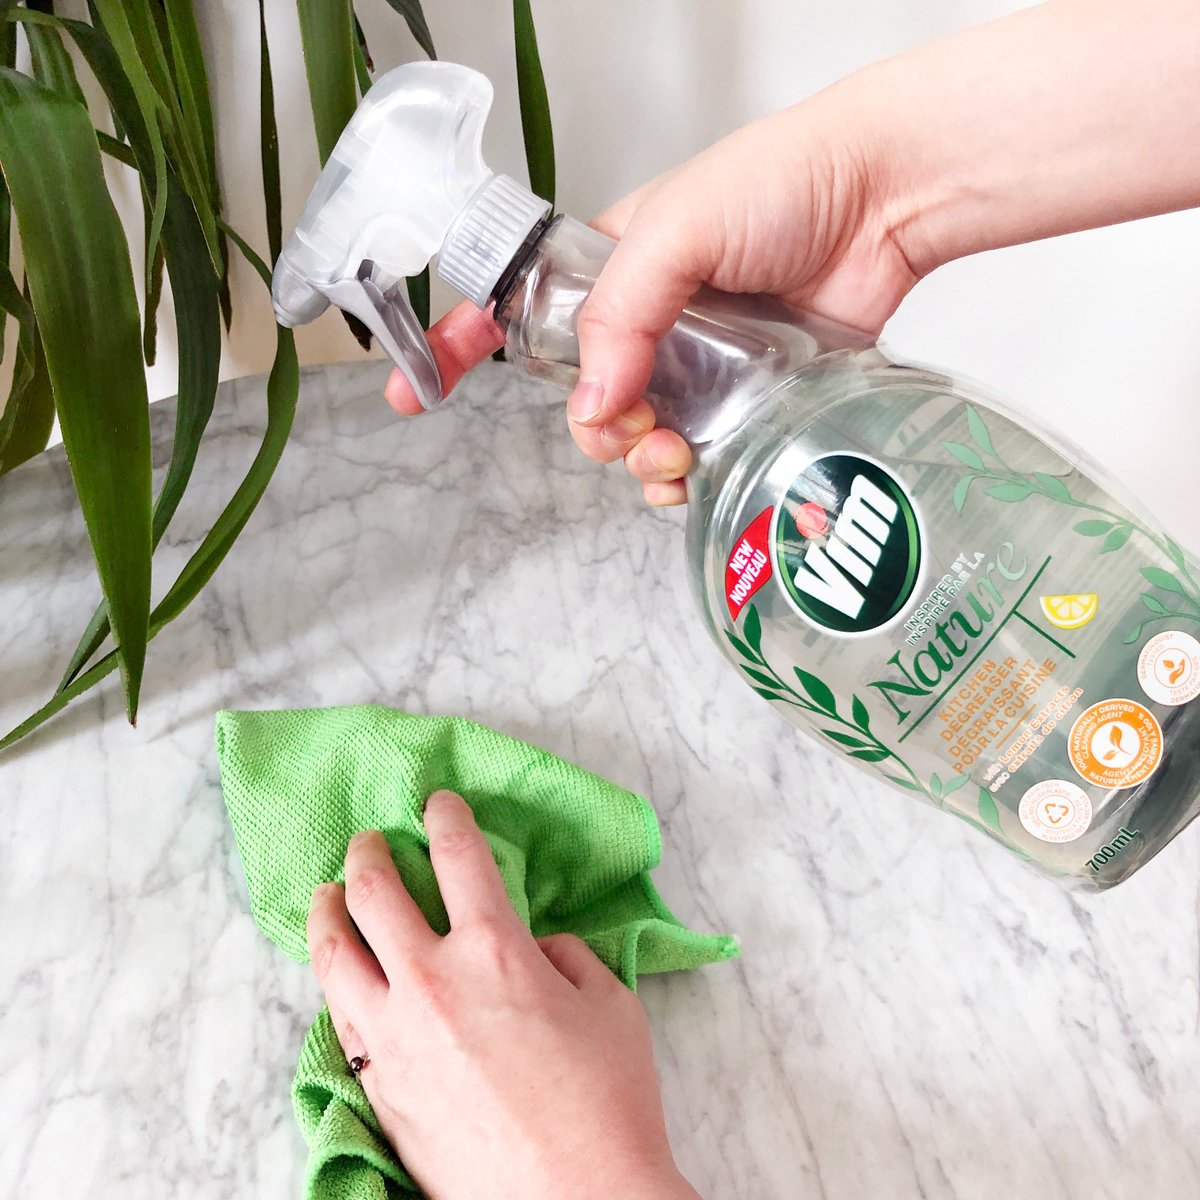 Do you have yet to tackle spring cleaning but need a little motivation? 😅 @VimCanada is back with an offer for 2 NEW products that are Inspired by Nature: Anti-Limescale Bathroom Spray and Degreaser Kitchen Spray. ☀️ 

APPLY HERE: familyrated.com/article/new-fa… #VimInspiredByNature!